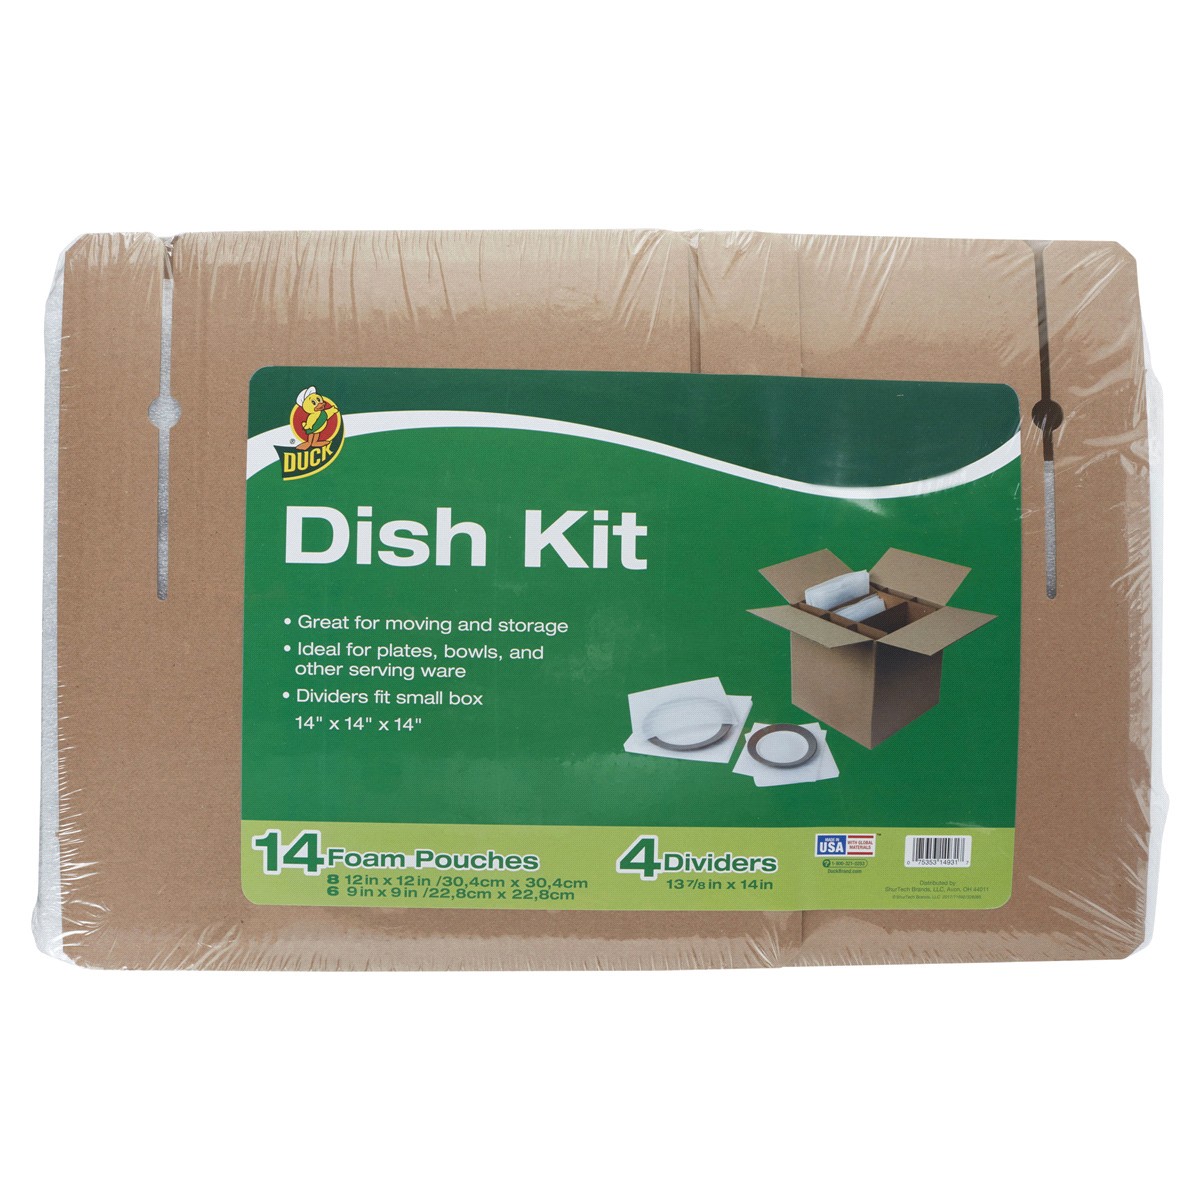 slide 1 of 1, Duck Brand Dish Kit, 14 Reusable Pouches and 4 Corrugate Dividers (Box Not Included), 1 ct